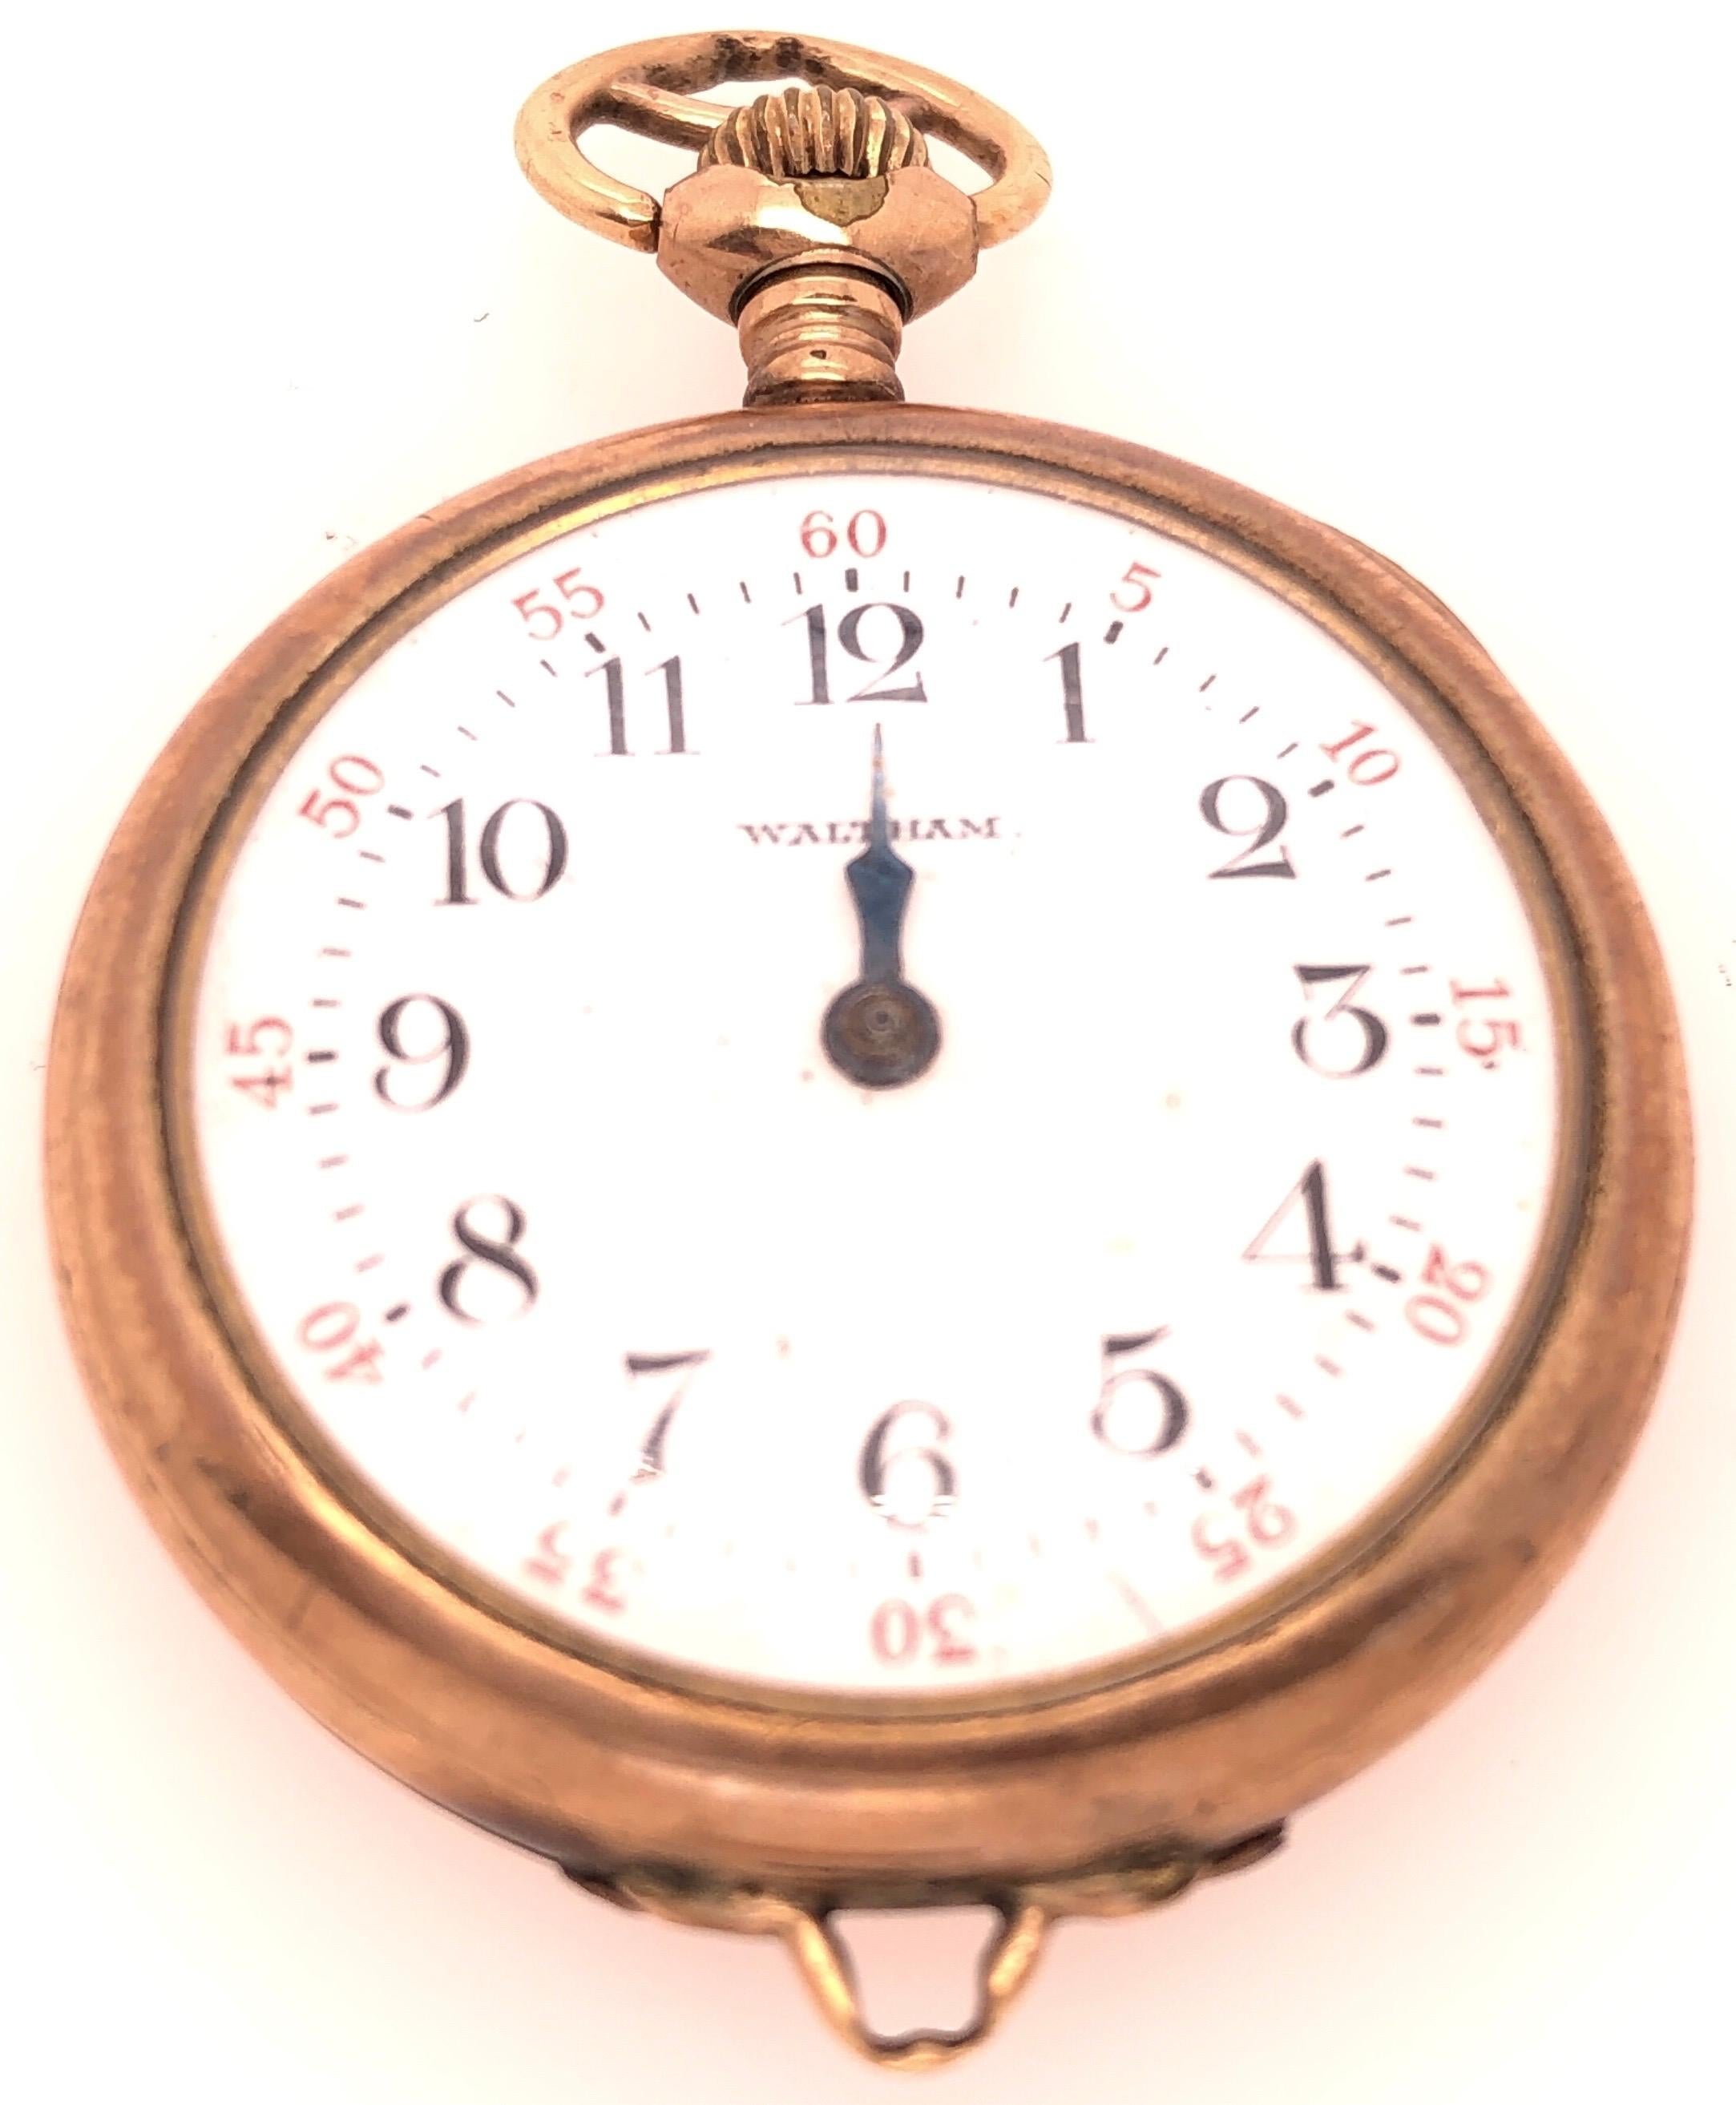 American Watch Co. Yellow Gold Plated Waltham Pocket Watch. This watch is marked Warranted. This watch is in working order. 
30mm diameter